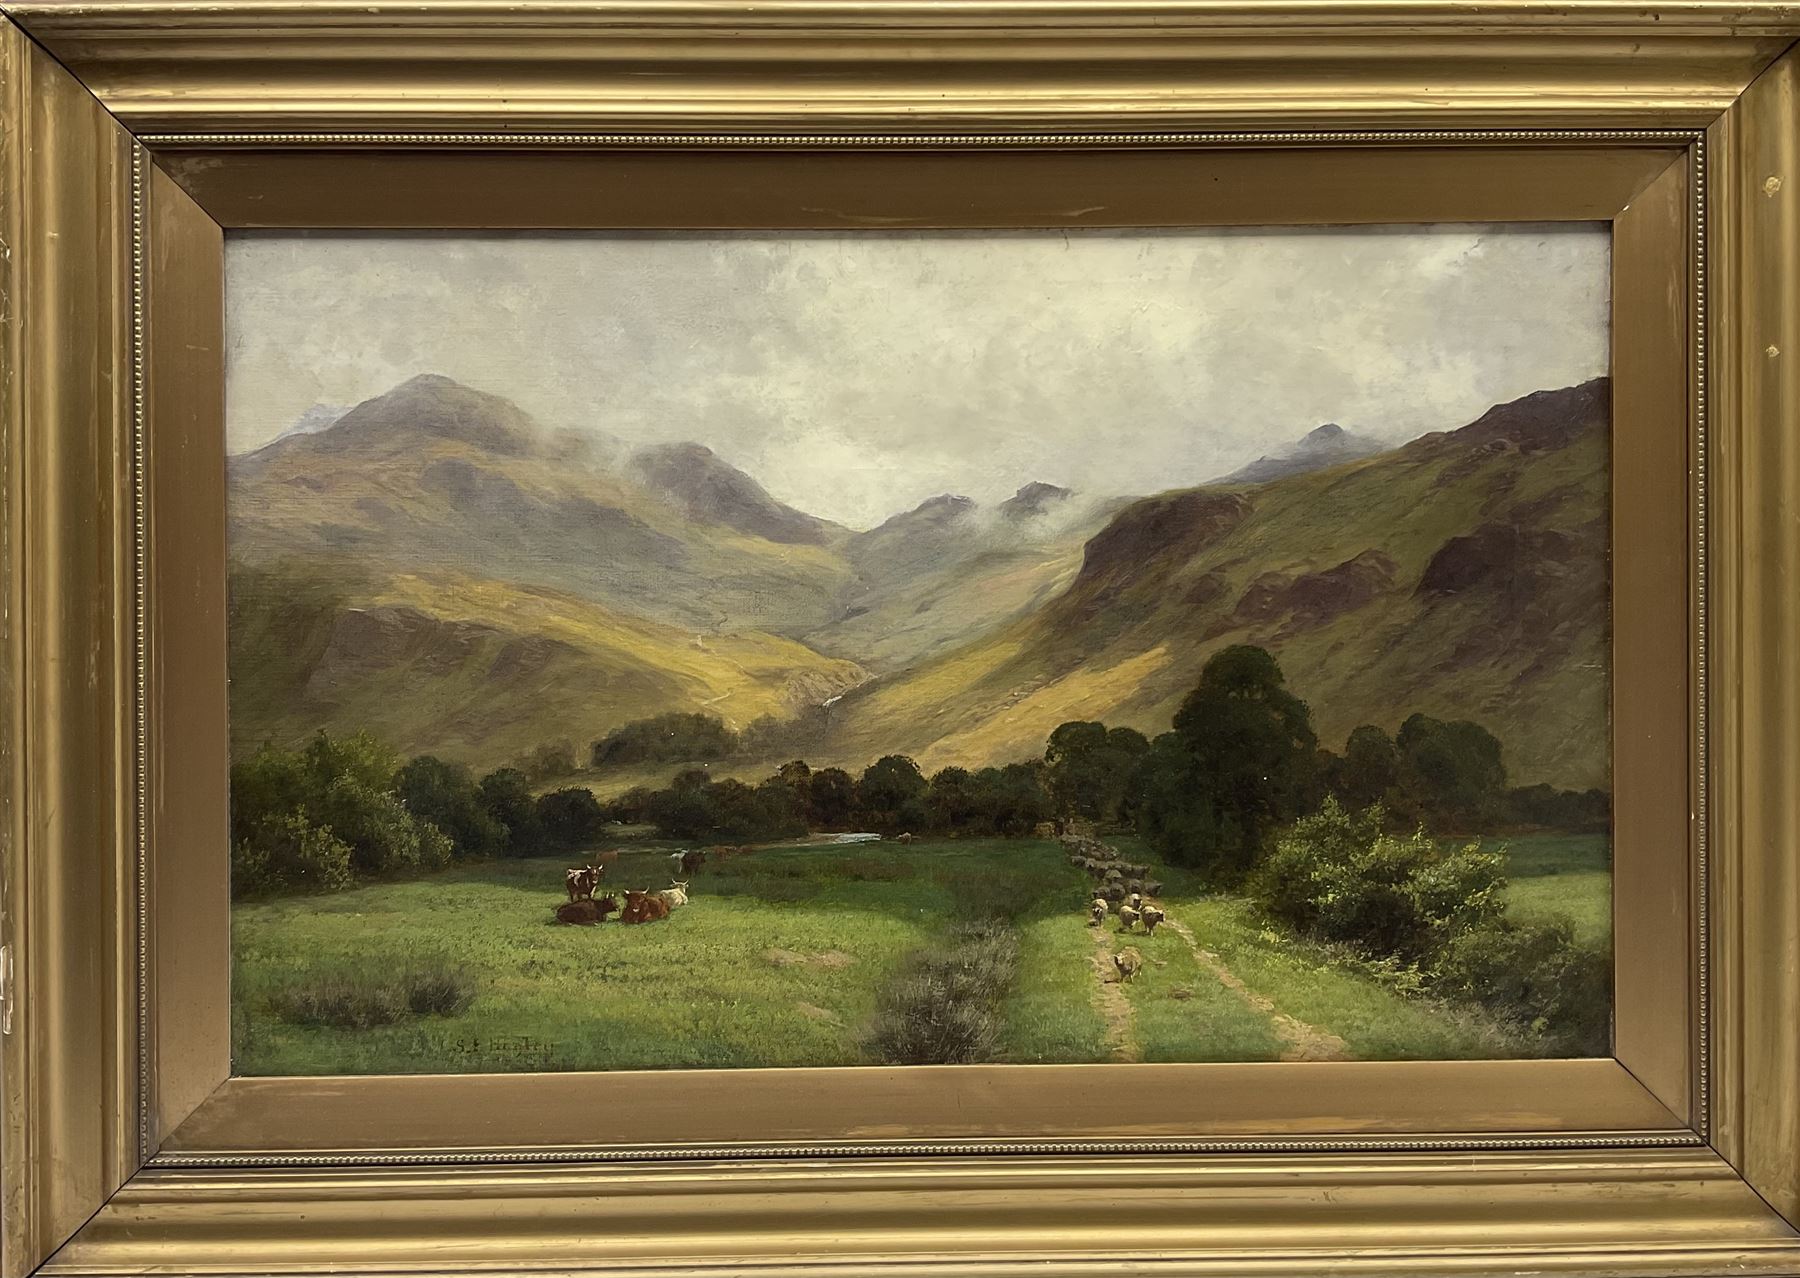 Stephen E Hogley (British 1842-1923): Sheep and Cattle in Upland Landscape - Image 2 of 4